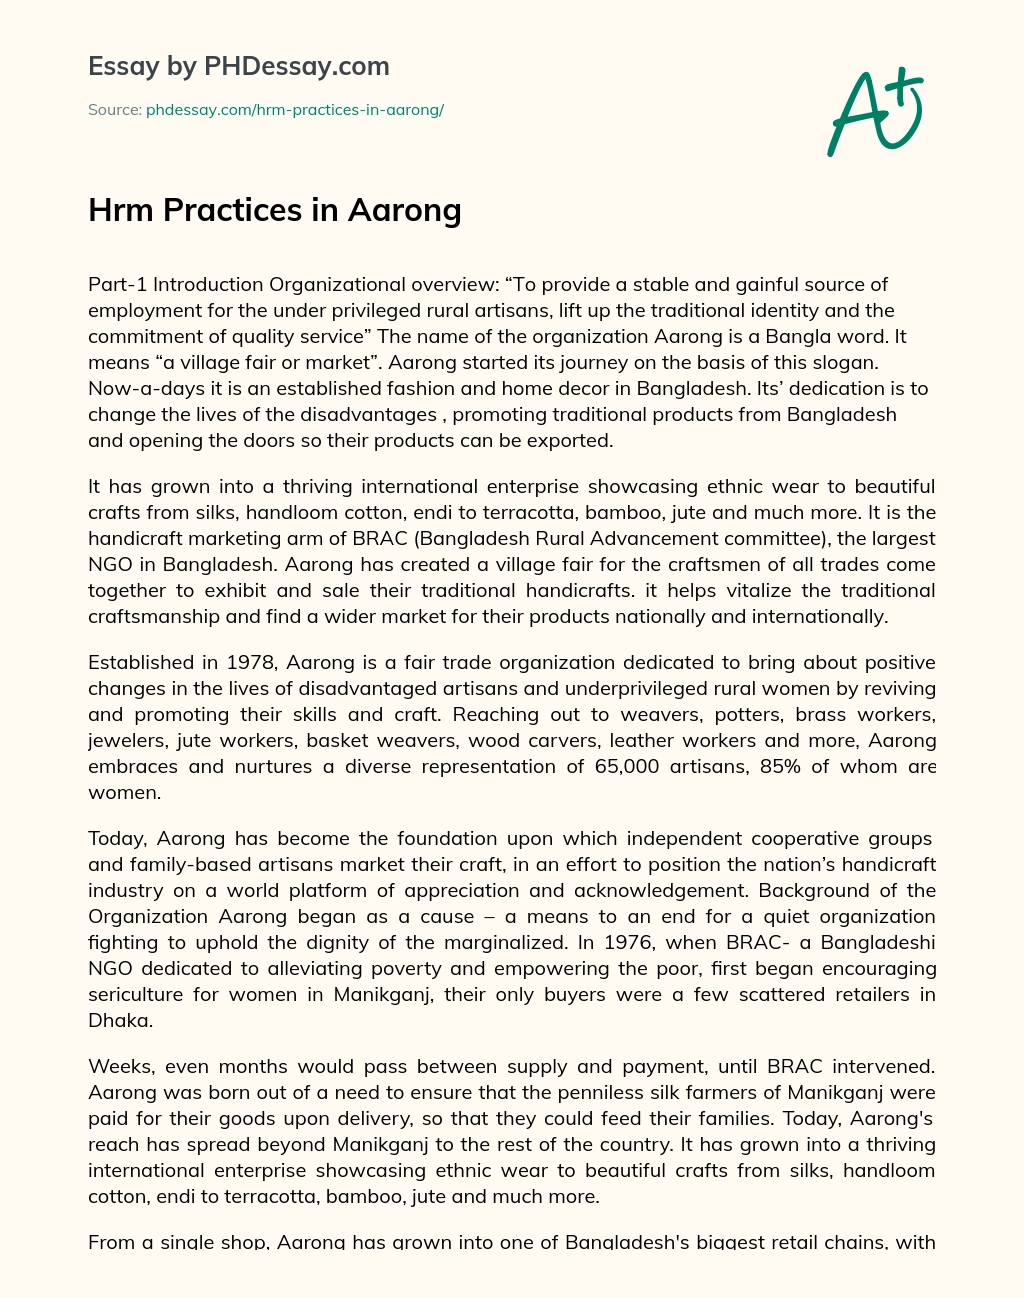 Hrm Practices in Aarong essay